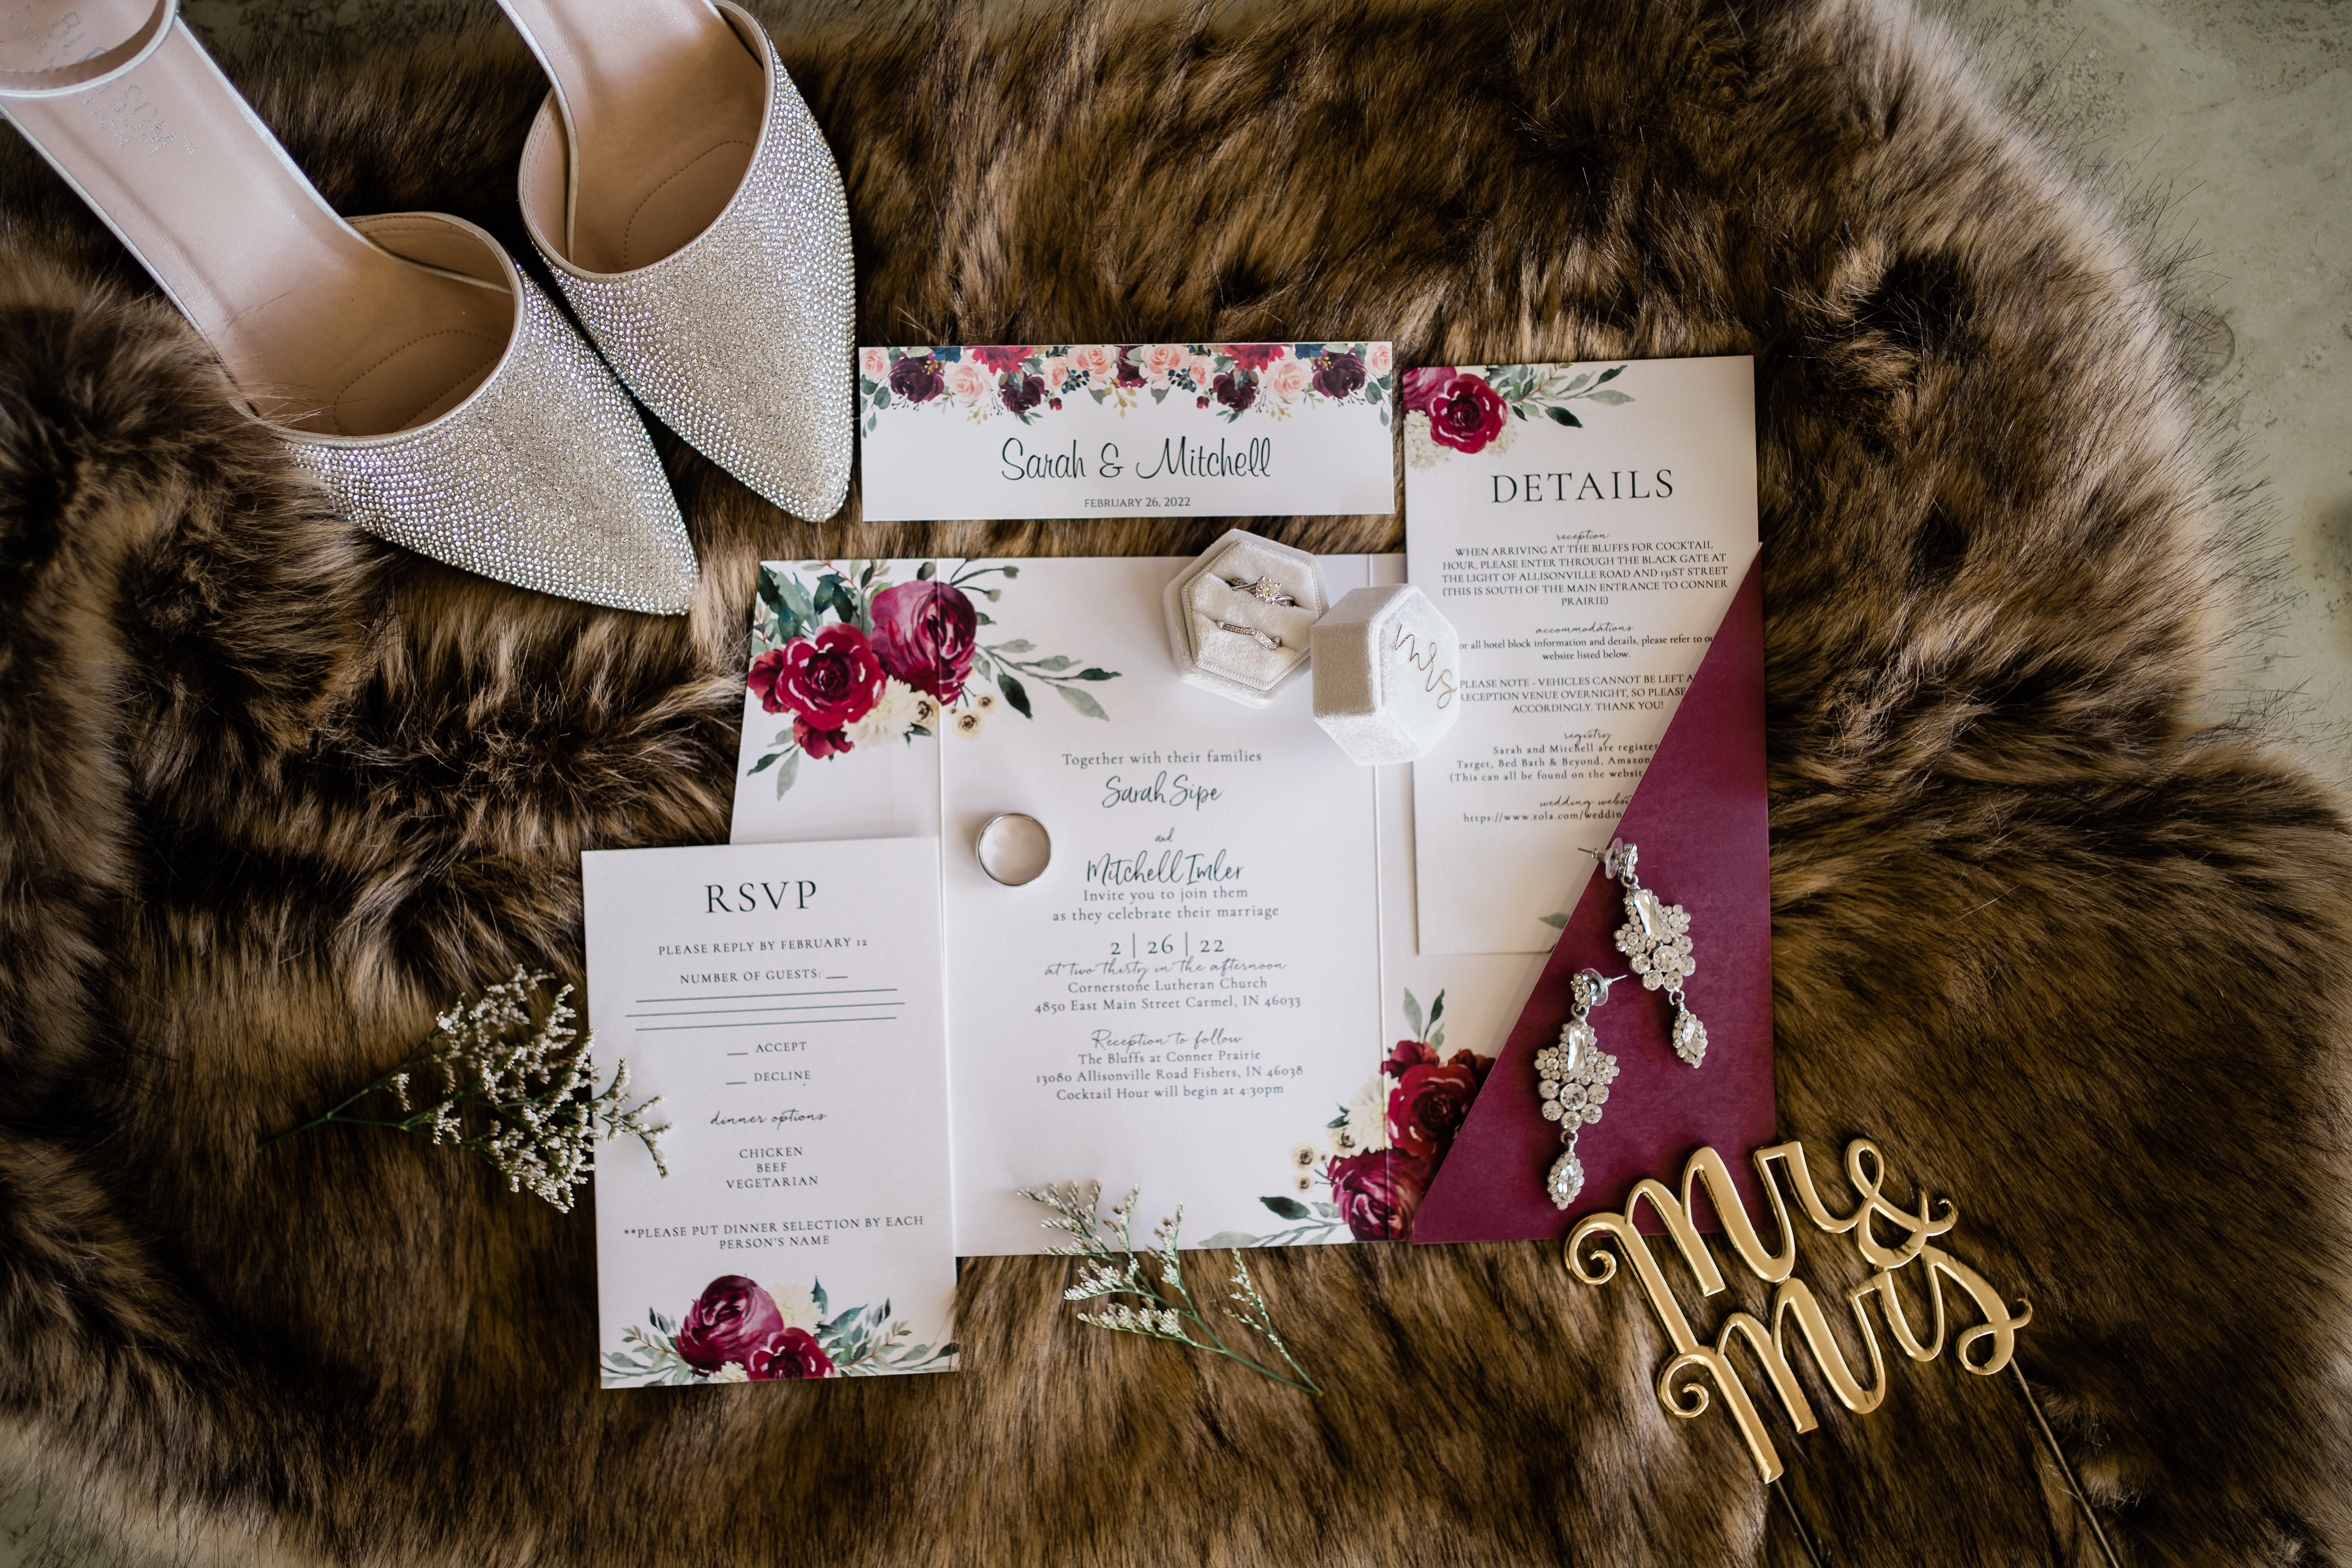 wedding details flatlay shot with wedding invitations in burgundy and brides shoes and earings